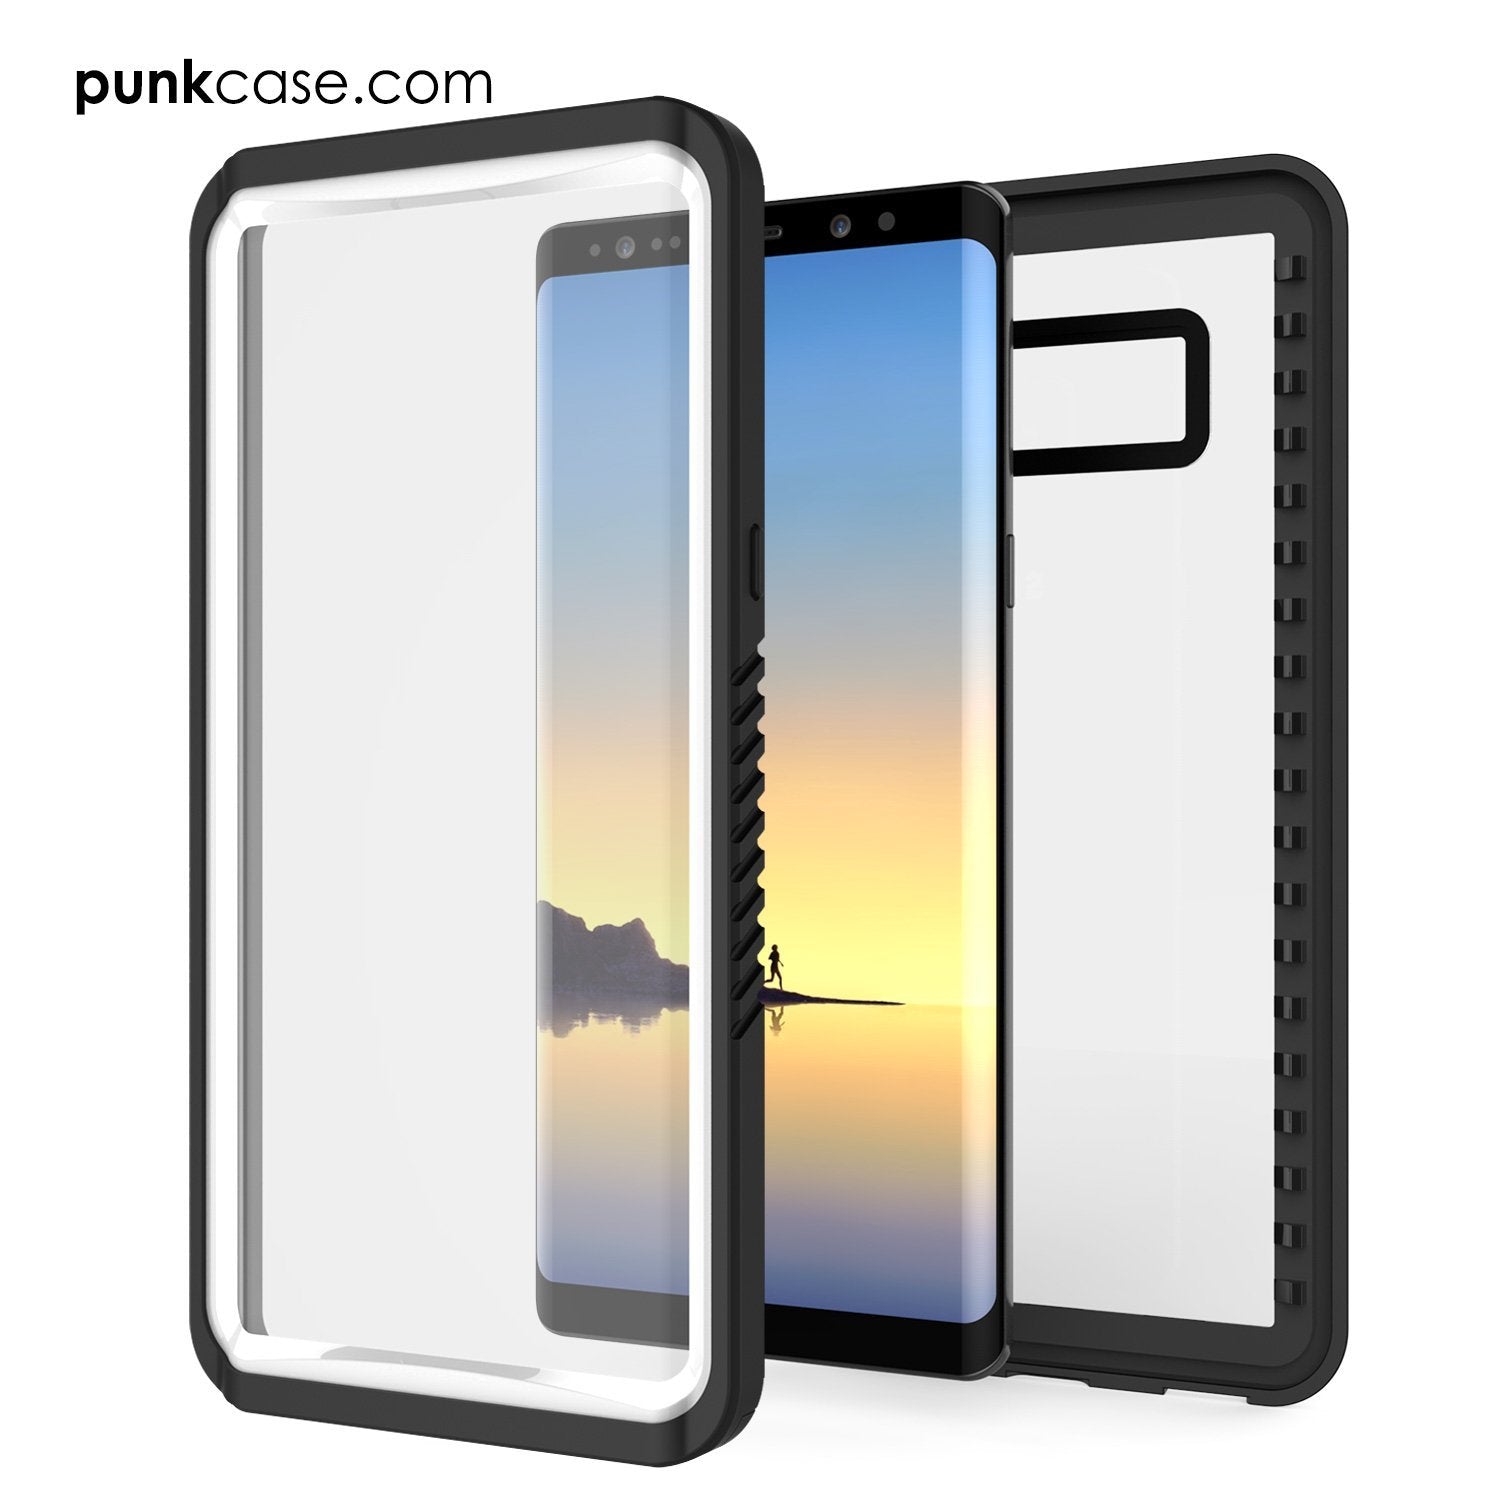 Galaxy Note 8 Case, Punkcase [Extreme Series] [Slim Fit] [IP68 Certified] [Shockproof] Armor Cover W/ Built In Screen Protector [White] - PunkCase NZ